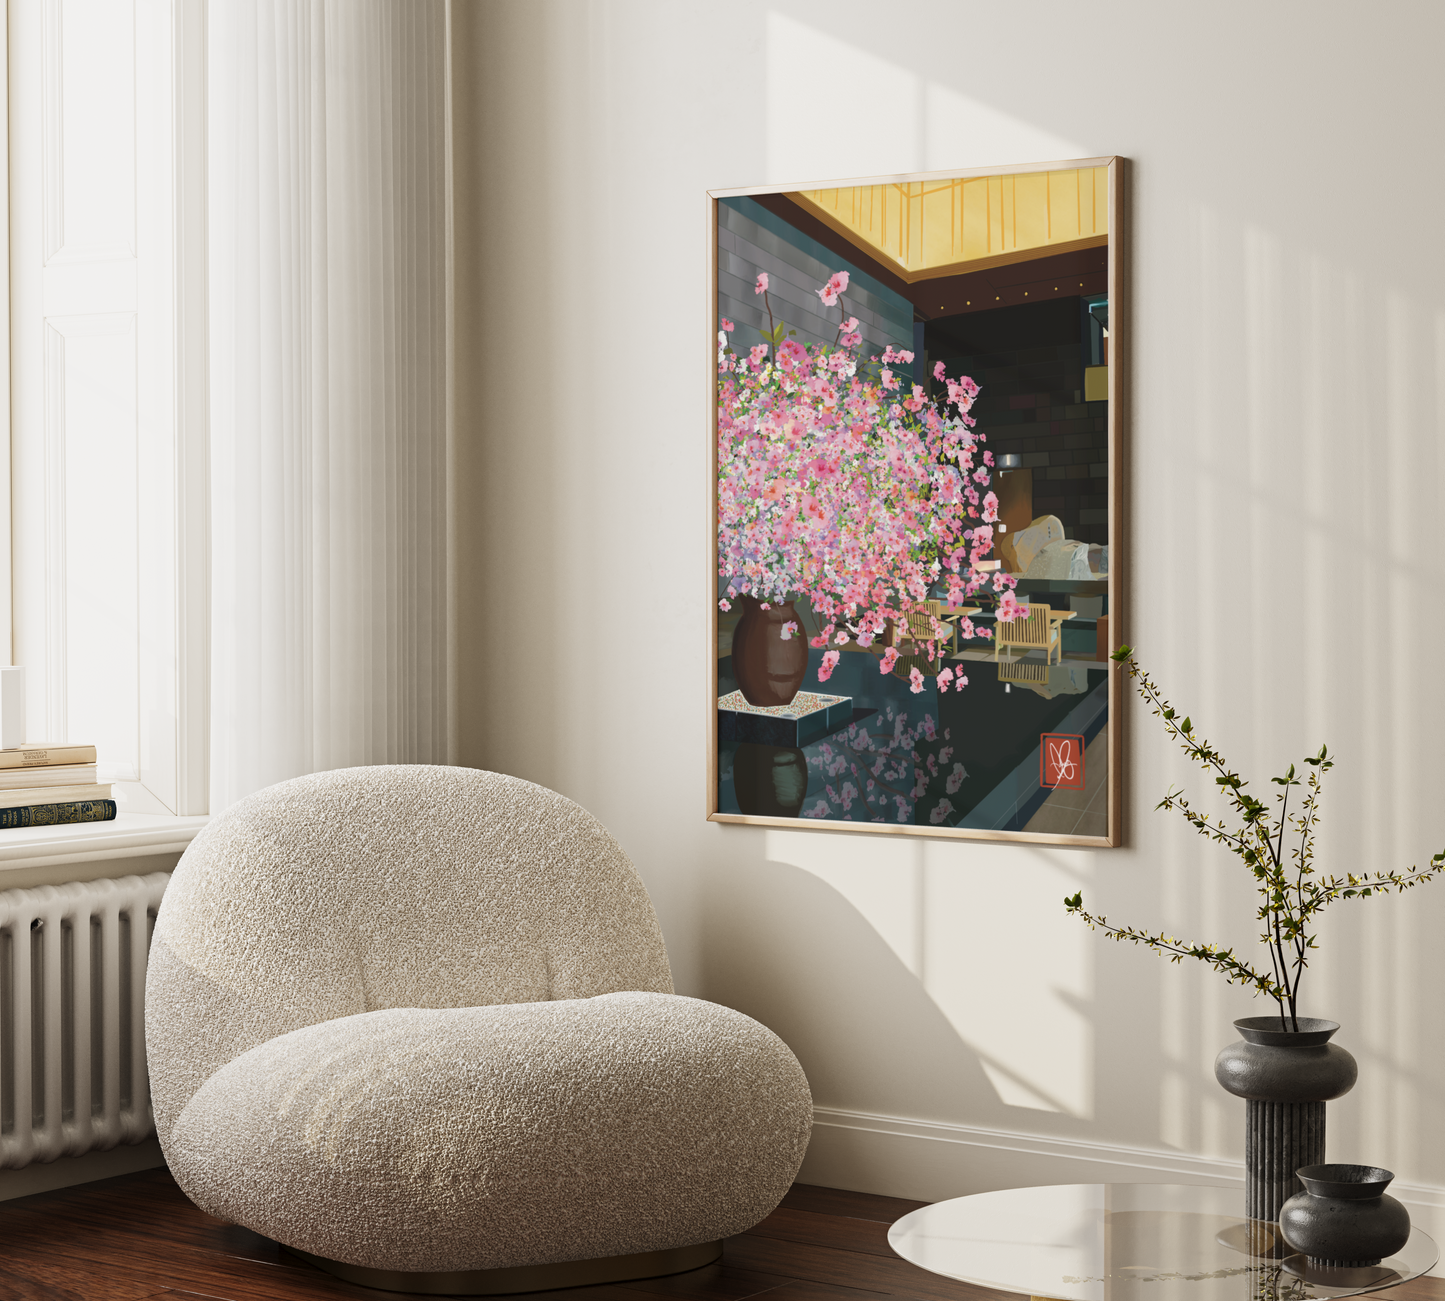 Unwrapped Collections' artistic rendition of sakura blossoms inspired by the elegance of Aman Tokyo Hotel. Wall Art against Boucle Chair. Interior Design.